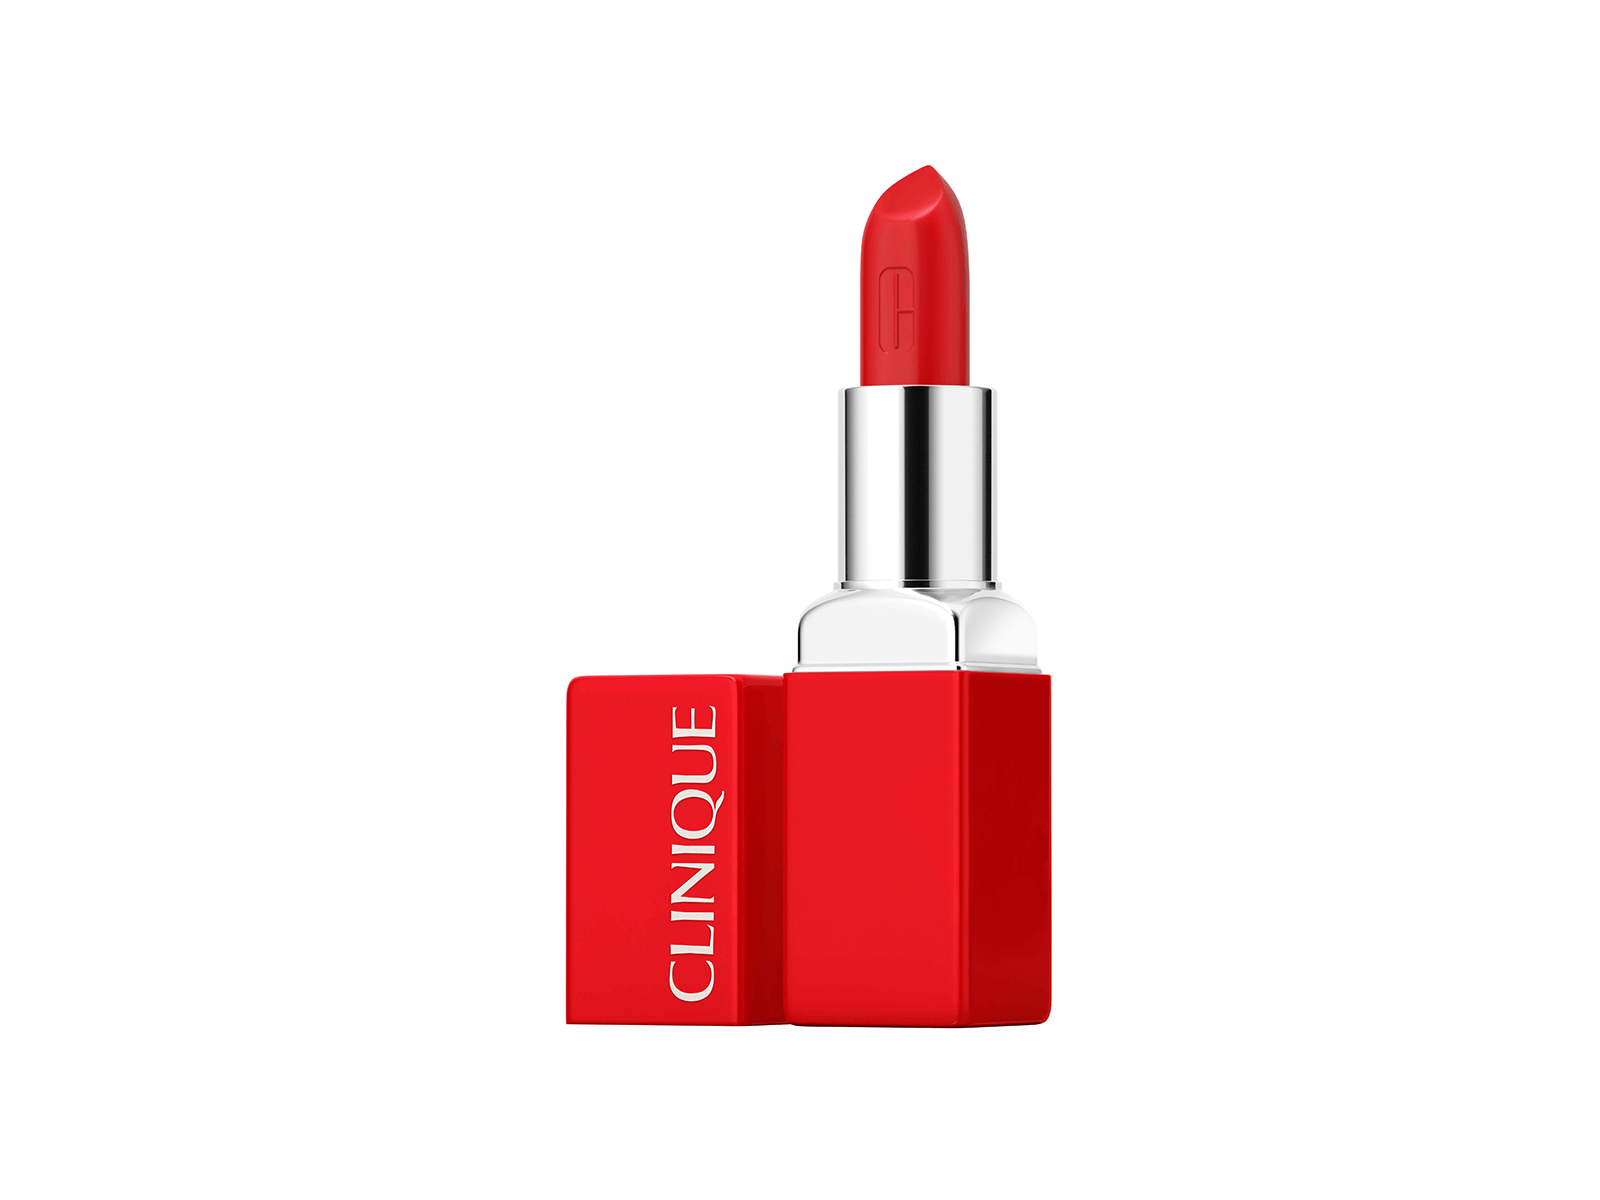 inique Pop Reds Lip Color + Cheek in Red Hot, $49